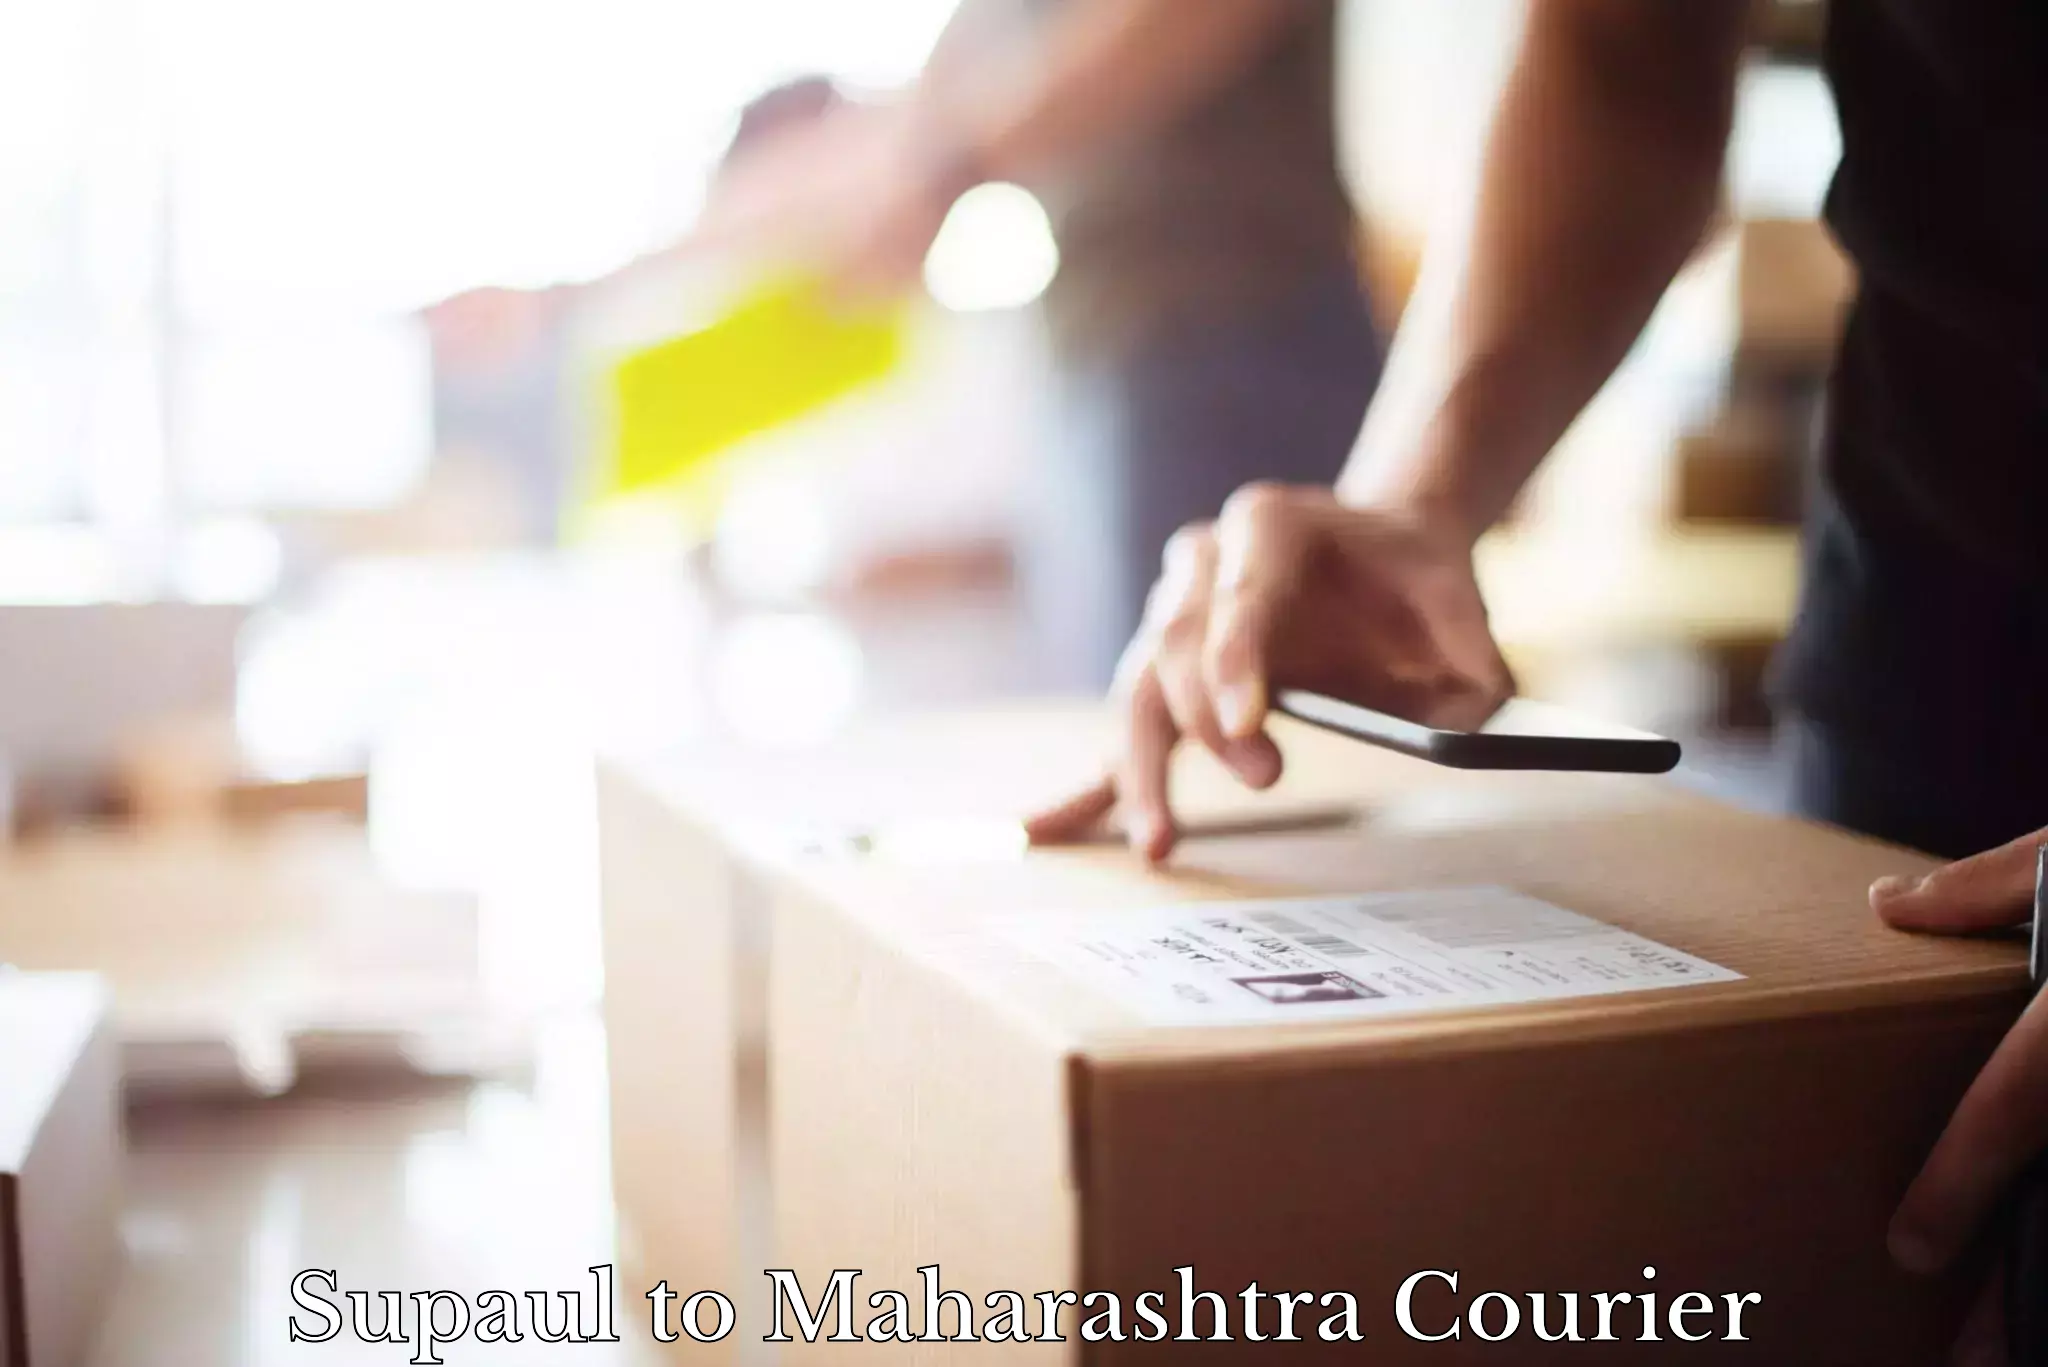 Business delivery service Supaul to Maharashtra